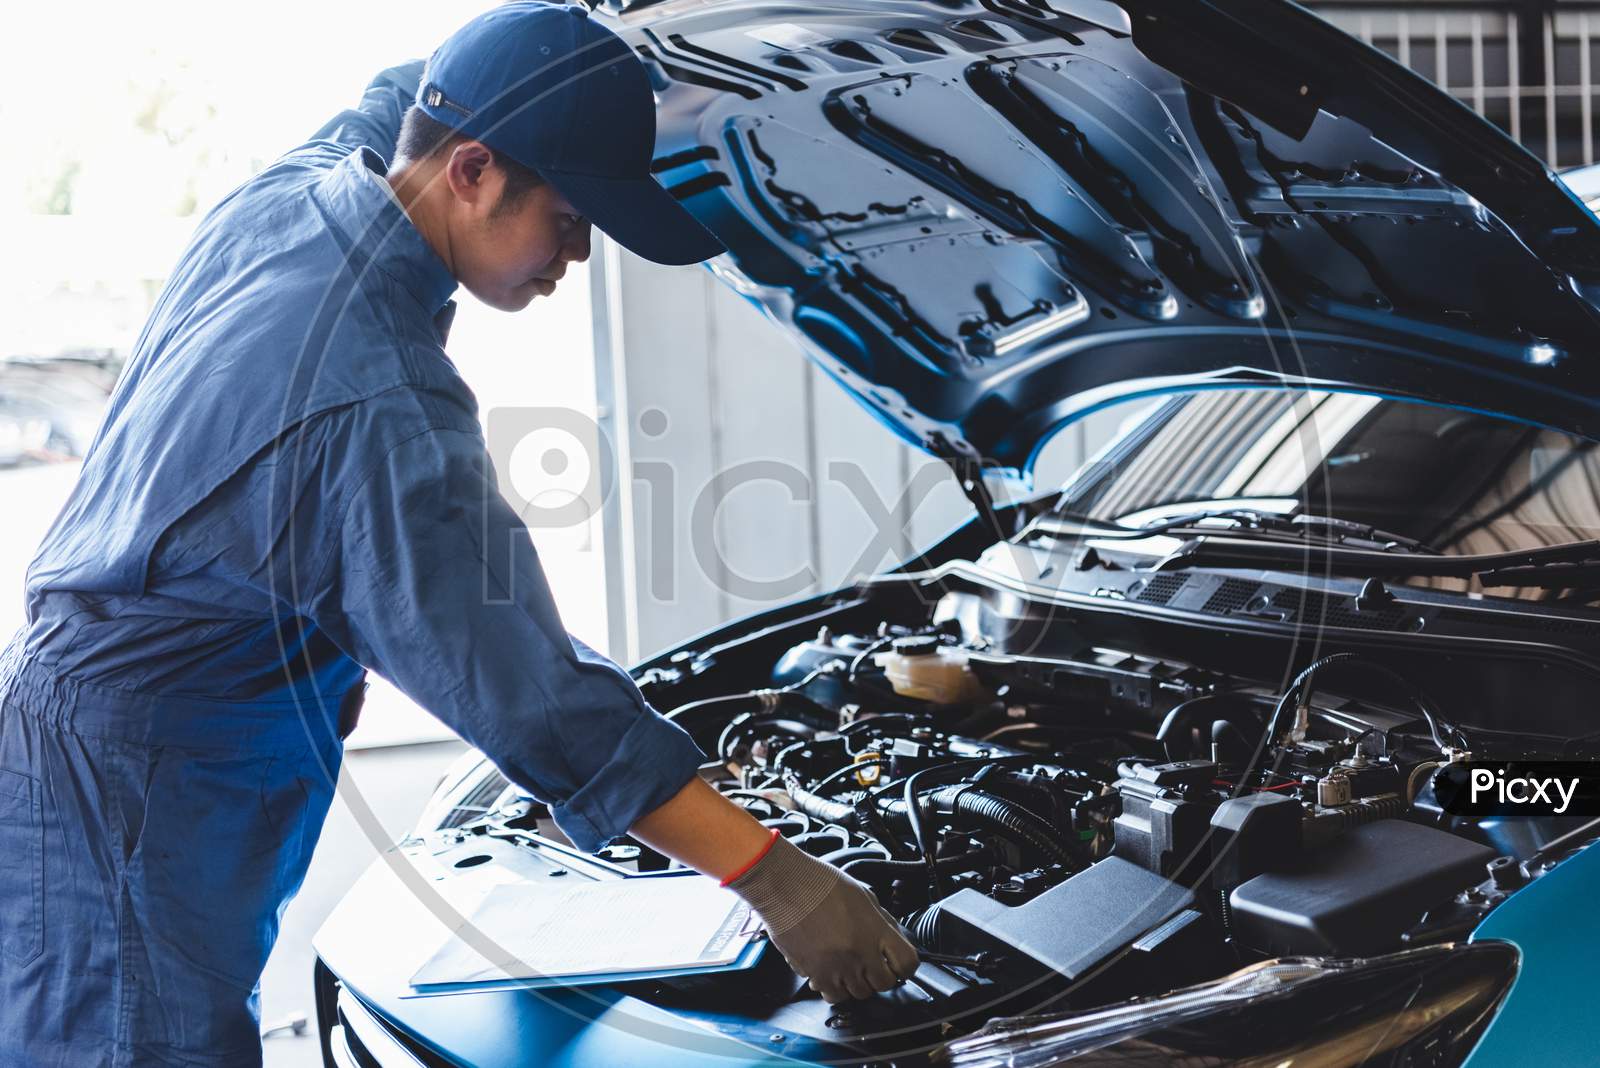 Car Mechanic Checking To Maintenance Vehicle By Customer Claim Order In Auto Repair Shop Garage By List In Clipboard. Engine Repair Service. People Occupation And Business Job. Automobile Technician